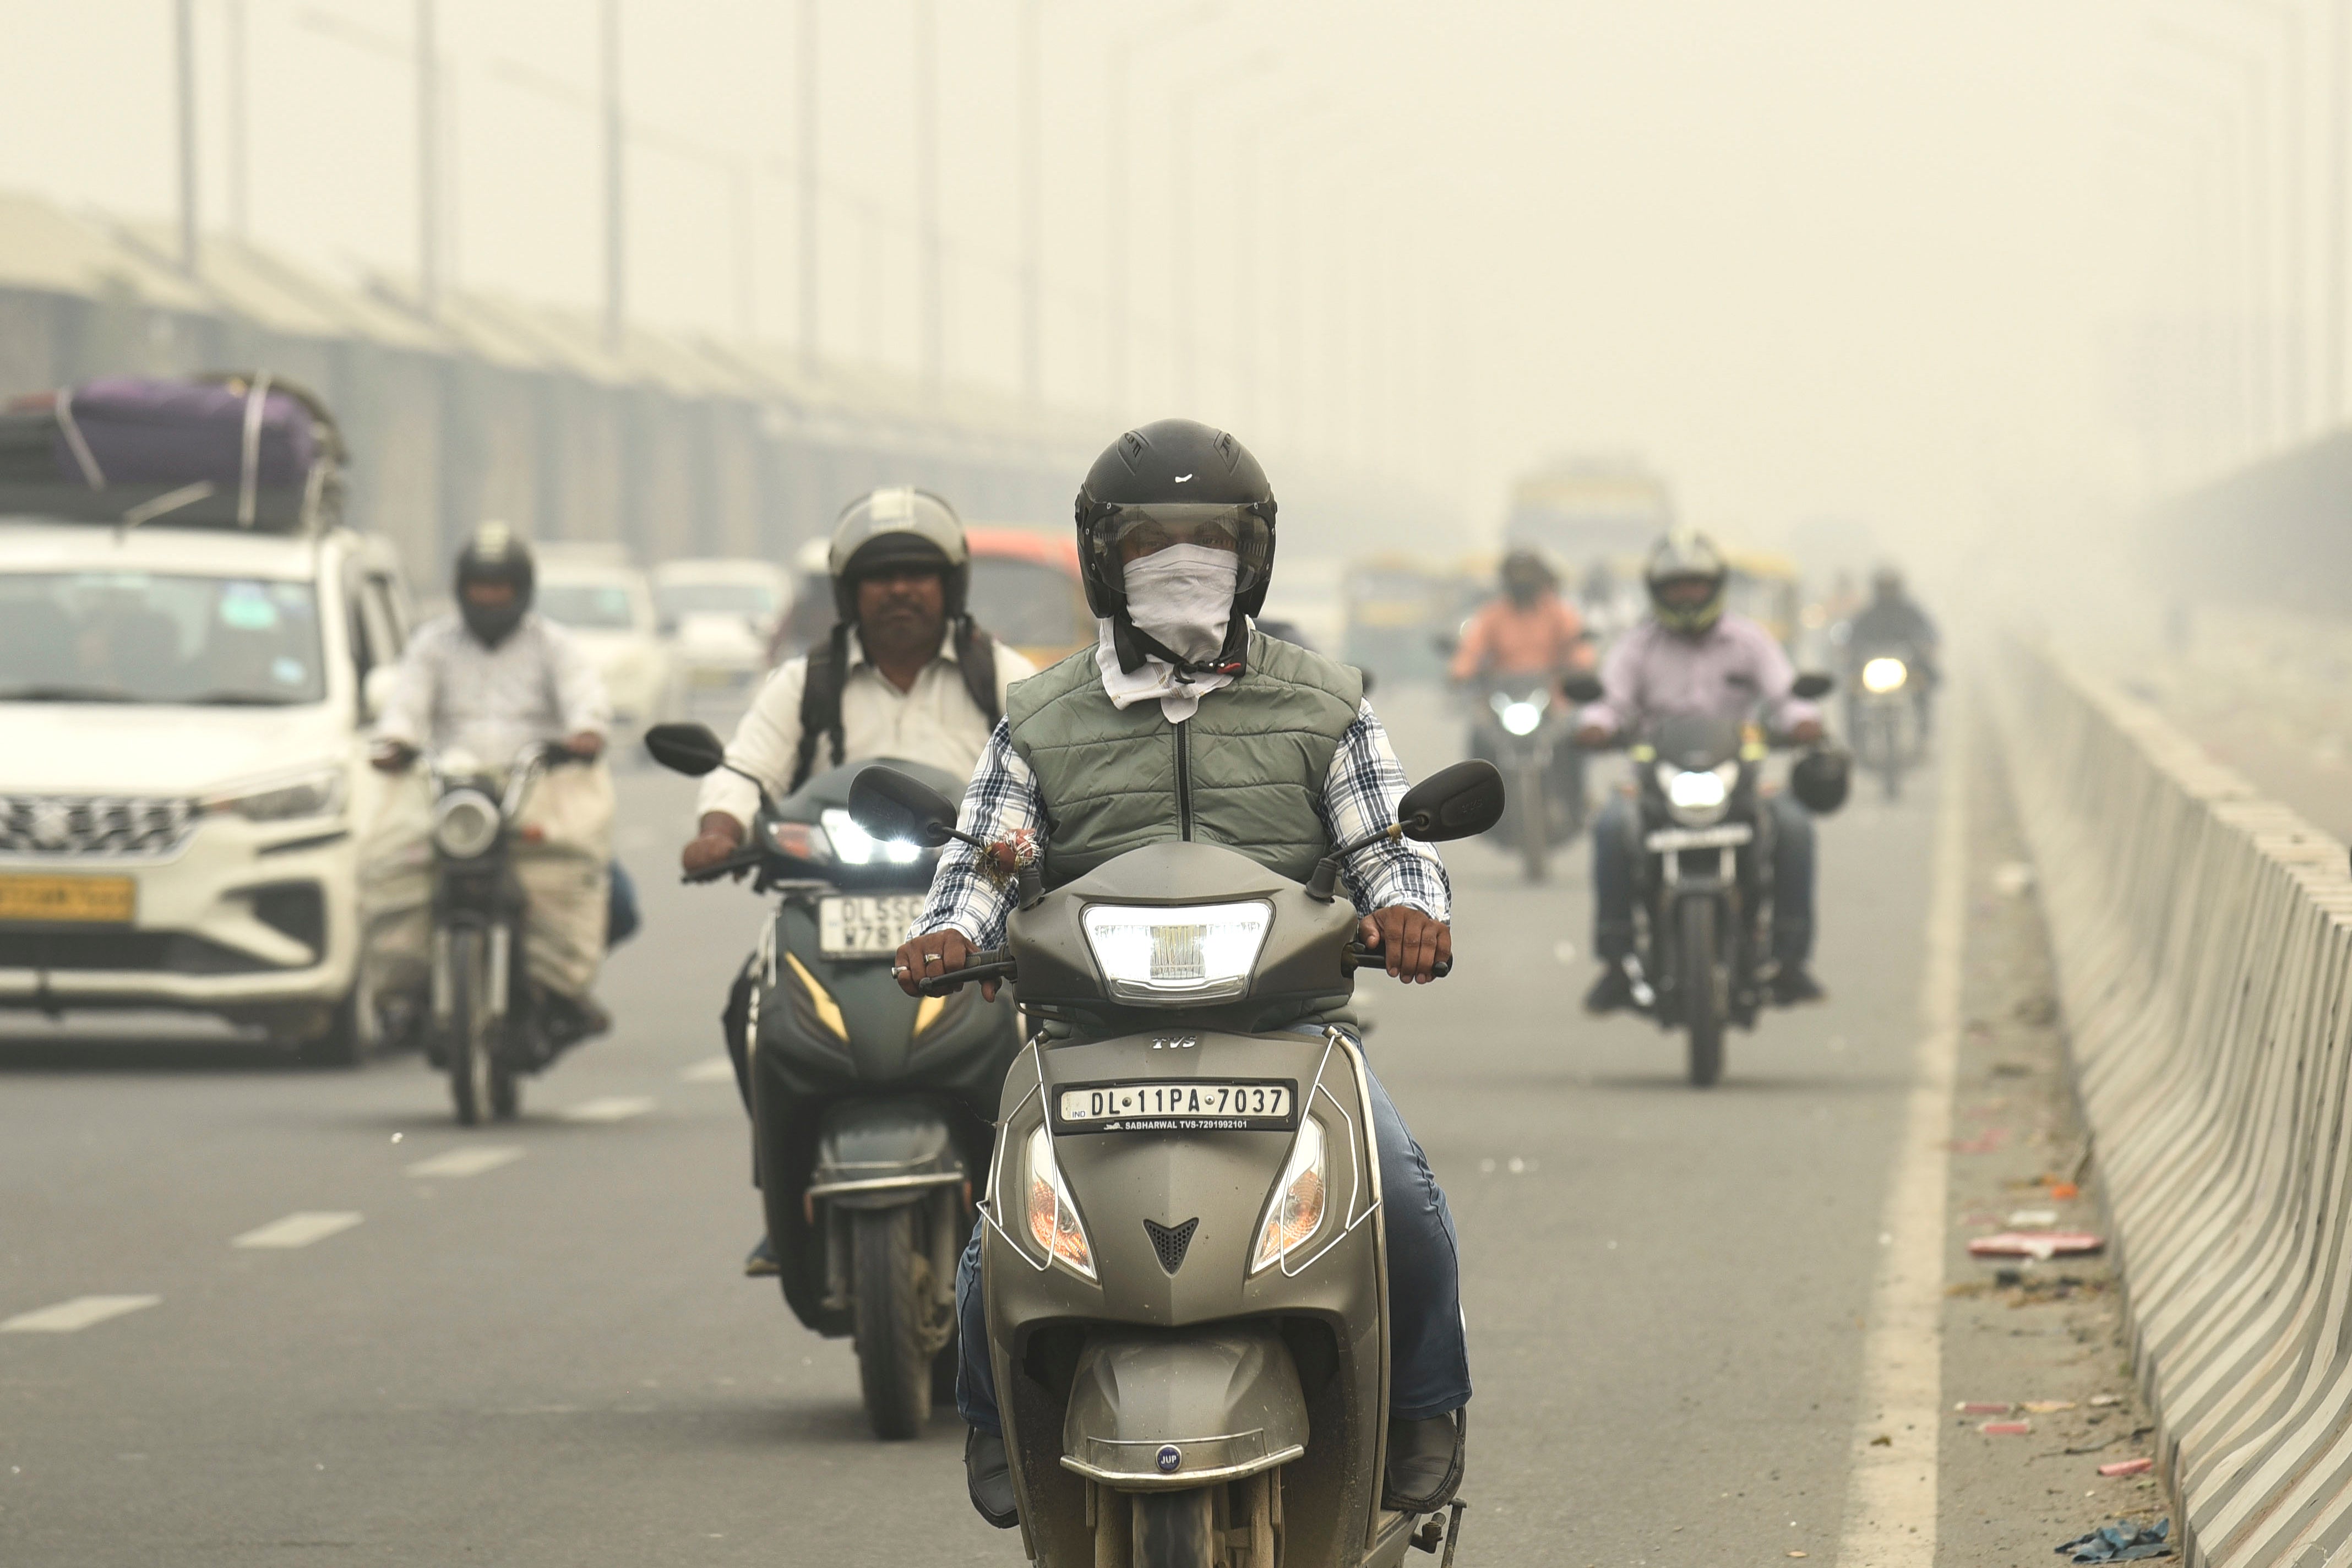 Traffic moves on a road enveloped by fog and smog in New Delhi, India, Friday